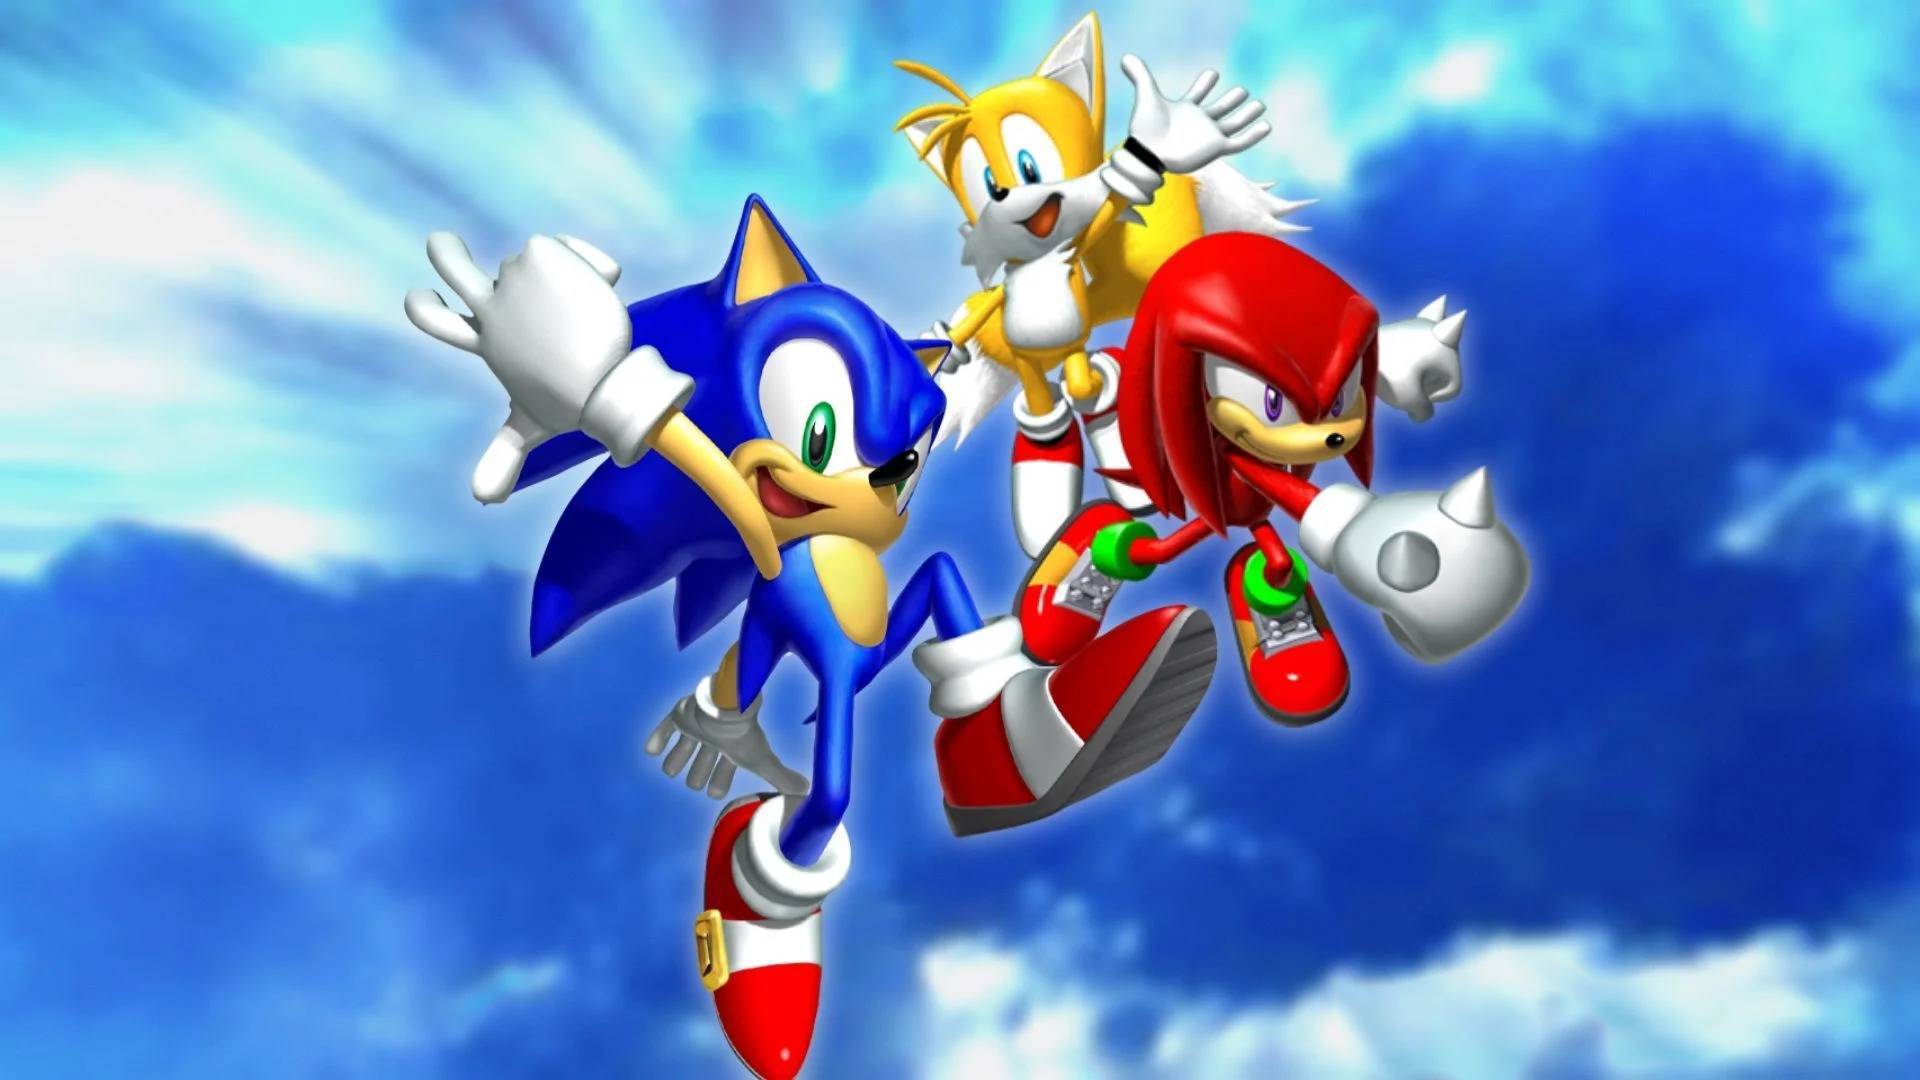 Sonic The Hedgehog 2 HD Sonic Wallpapers  HD Wallpapers  ID 48470